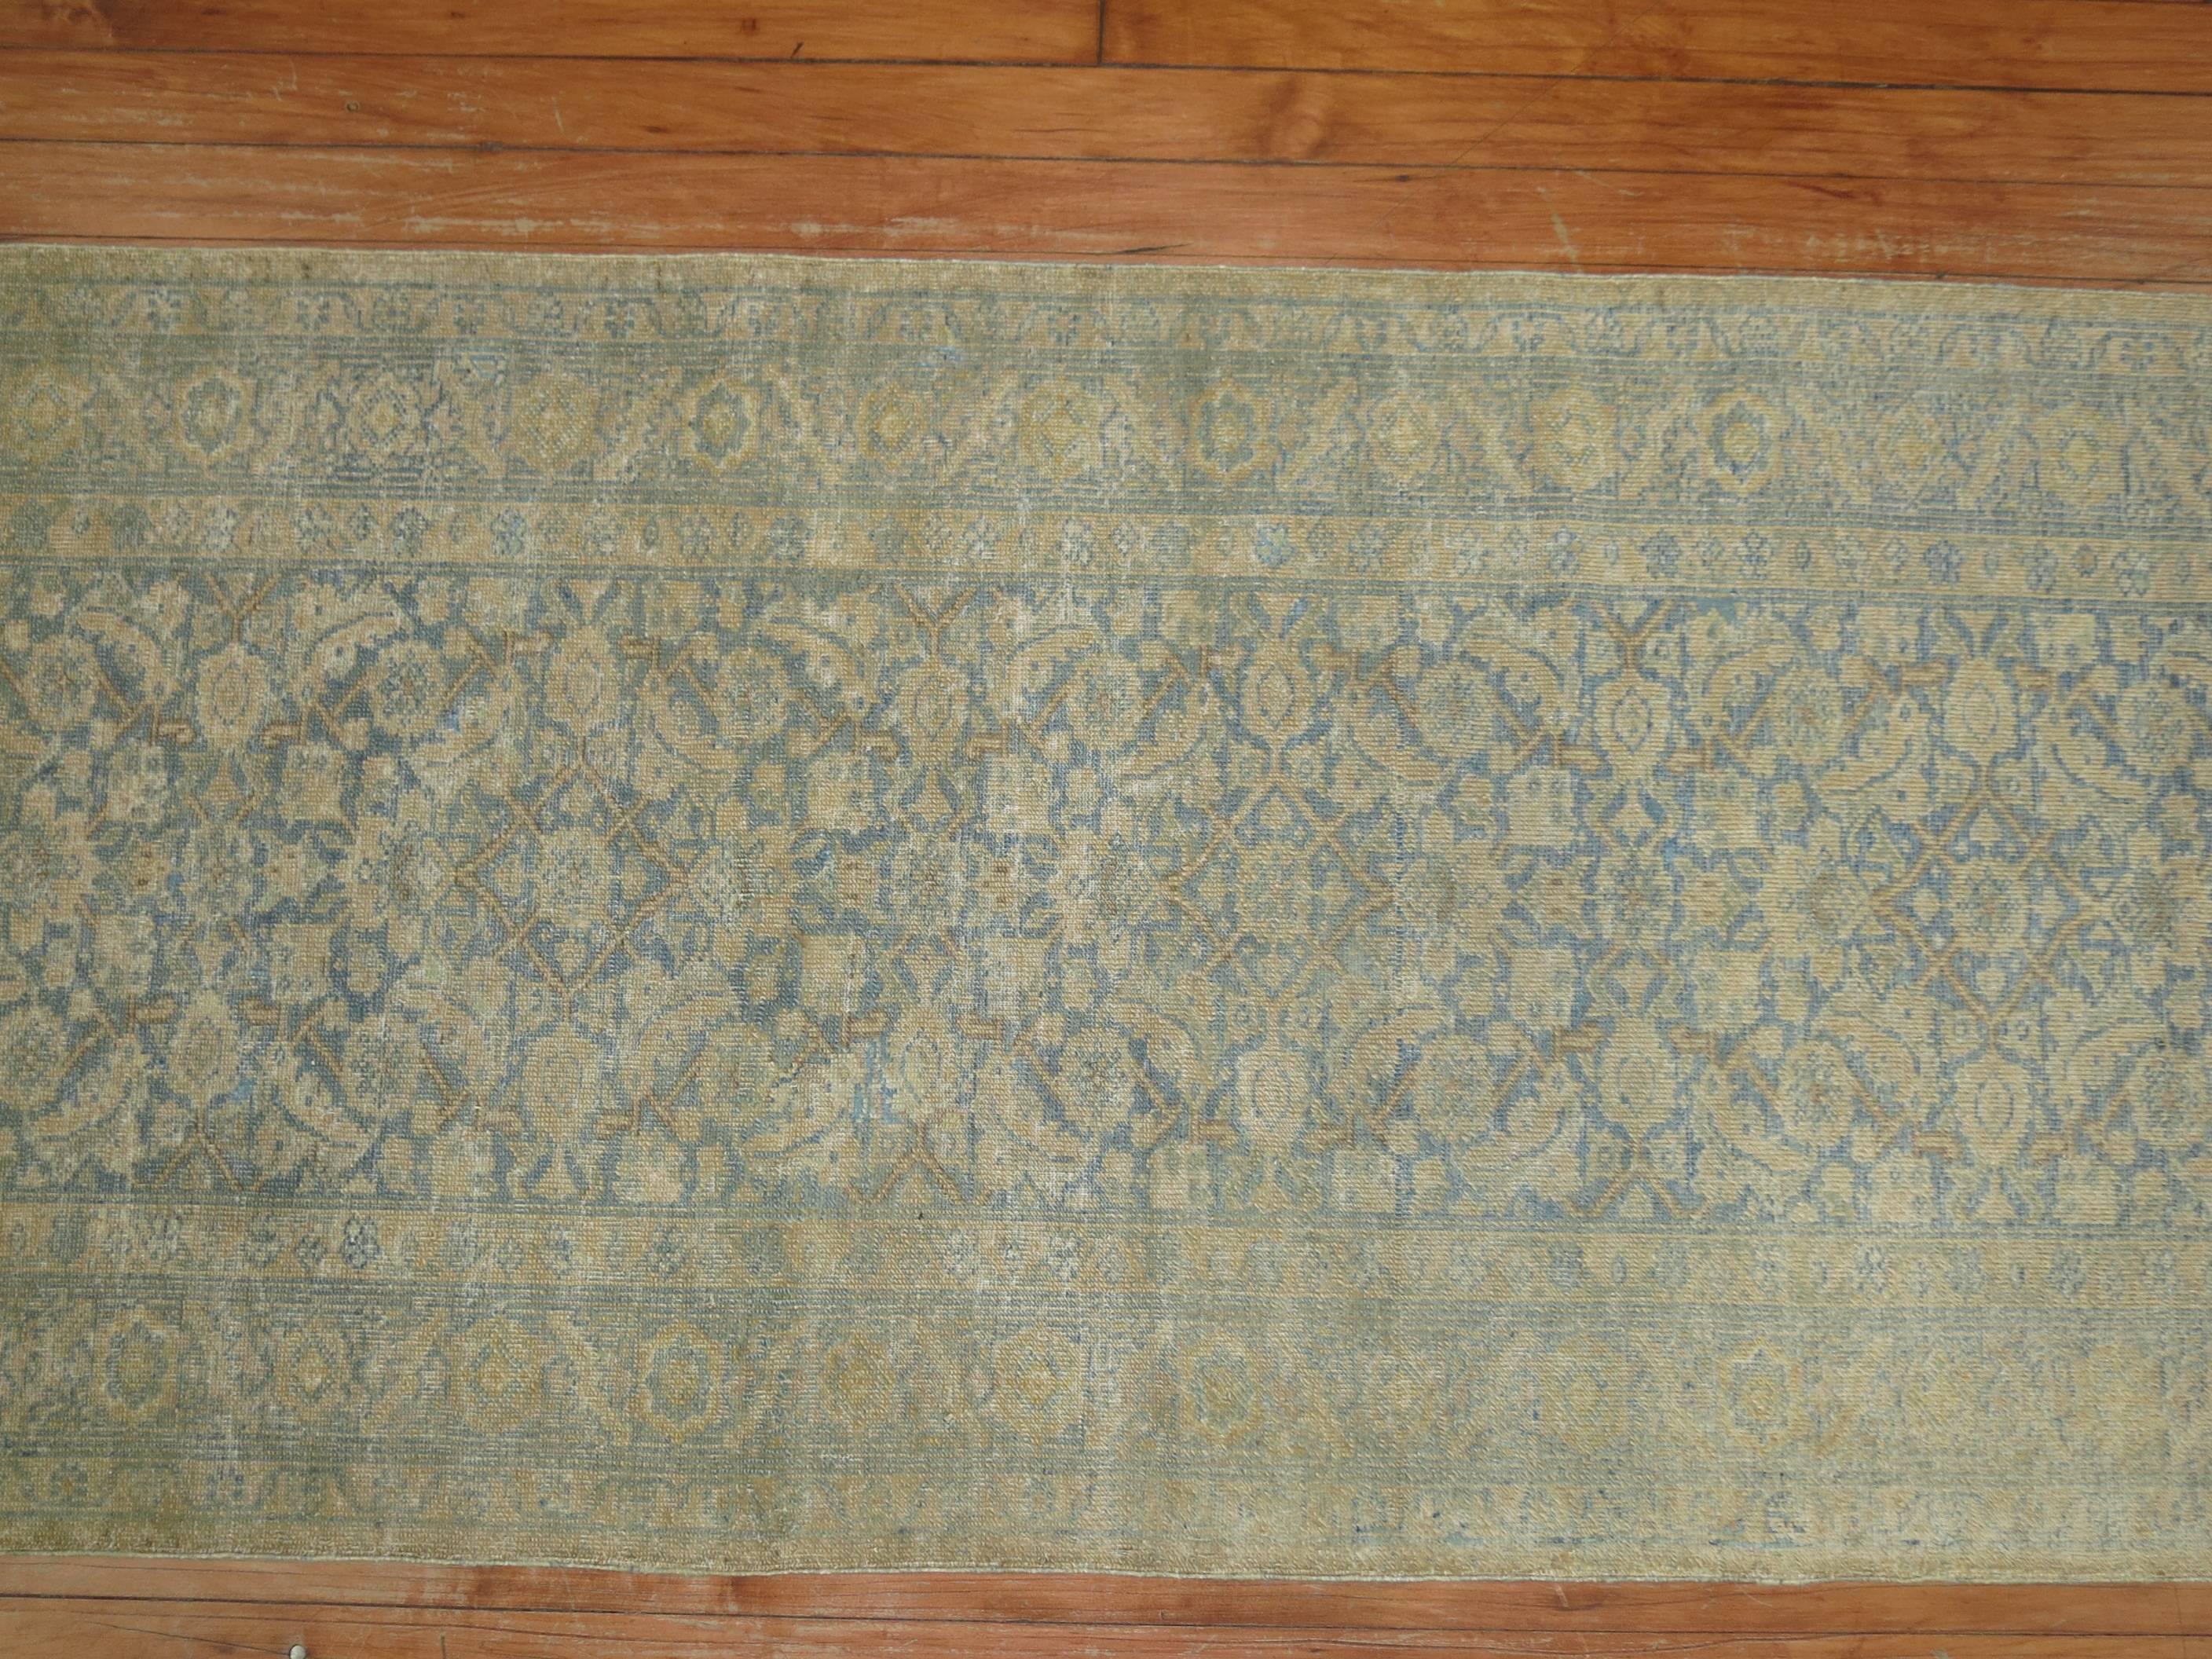 Hand-Woven Narrow Pale Blue and Gold Handmade Persian Tabriz Runner For Sale